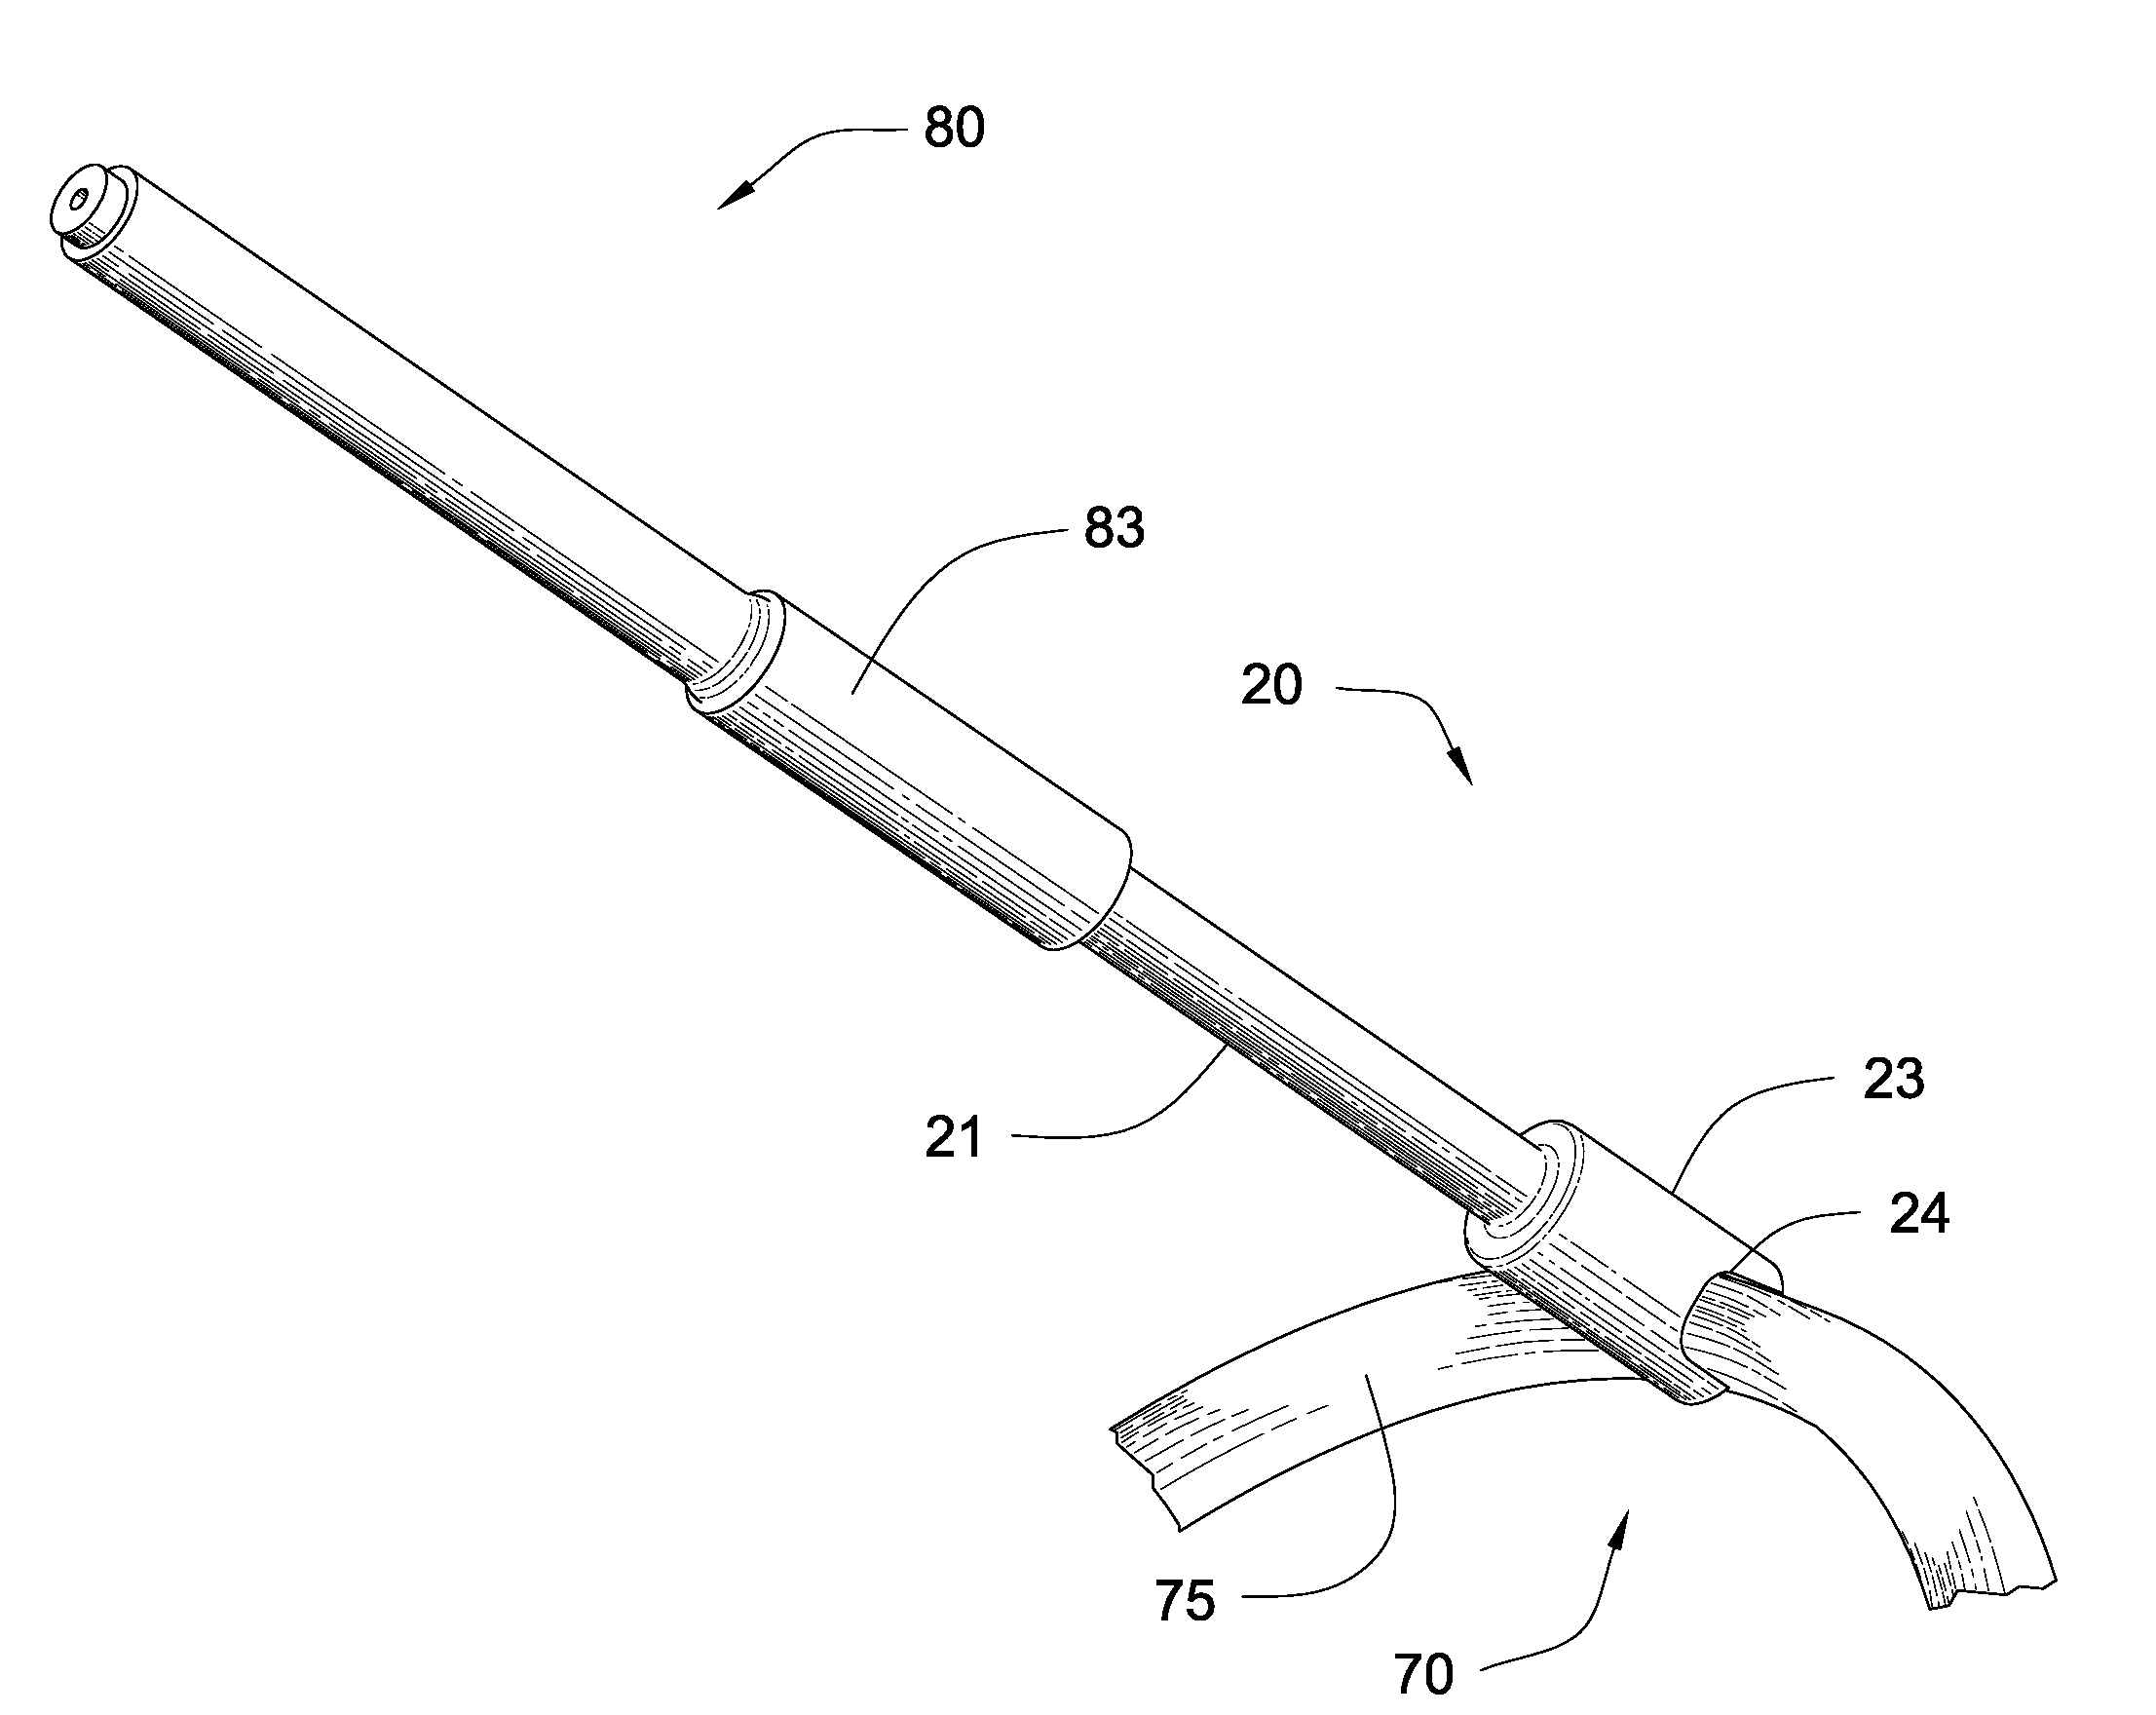 An internal coaxial cable electrical connector for use in downhole tools